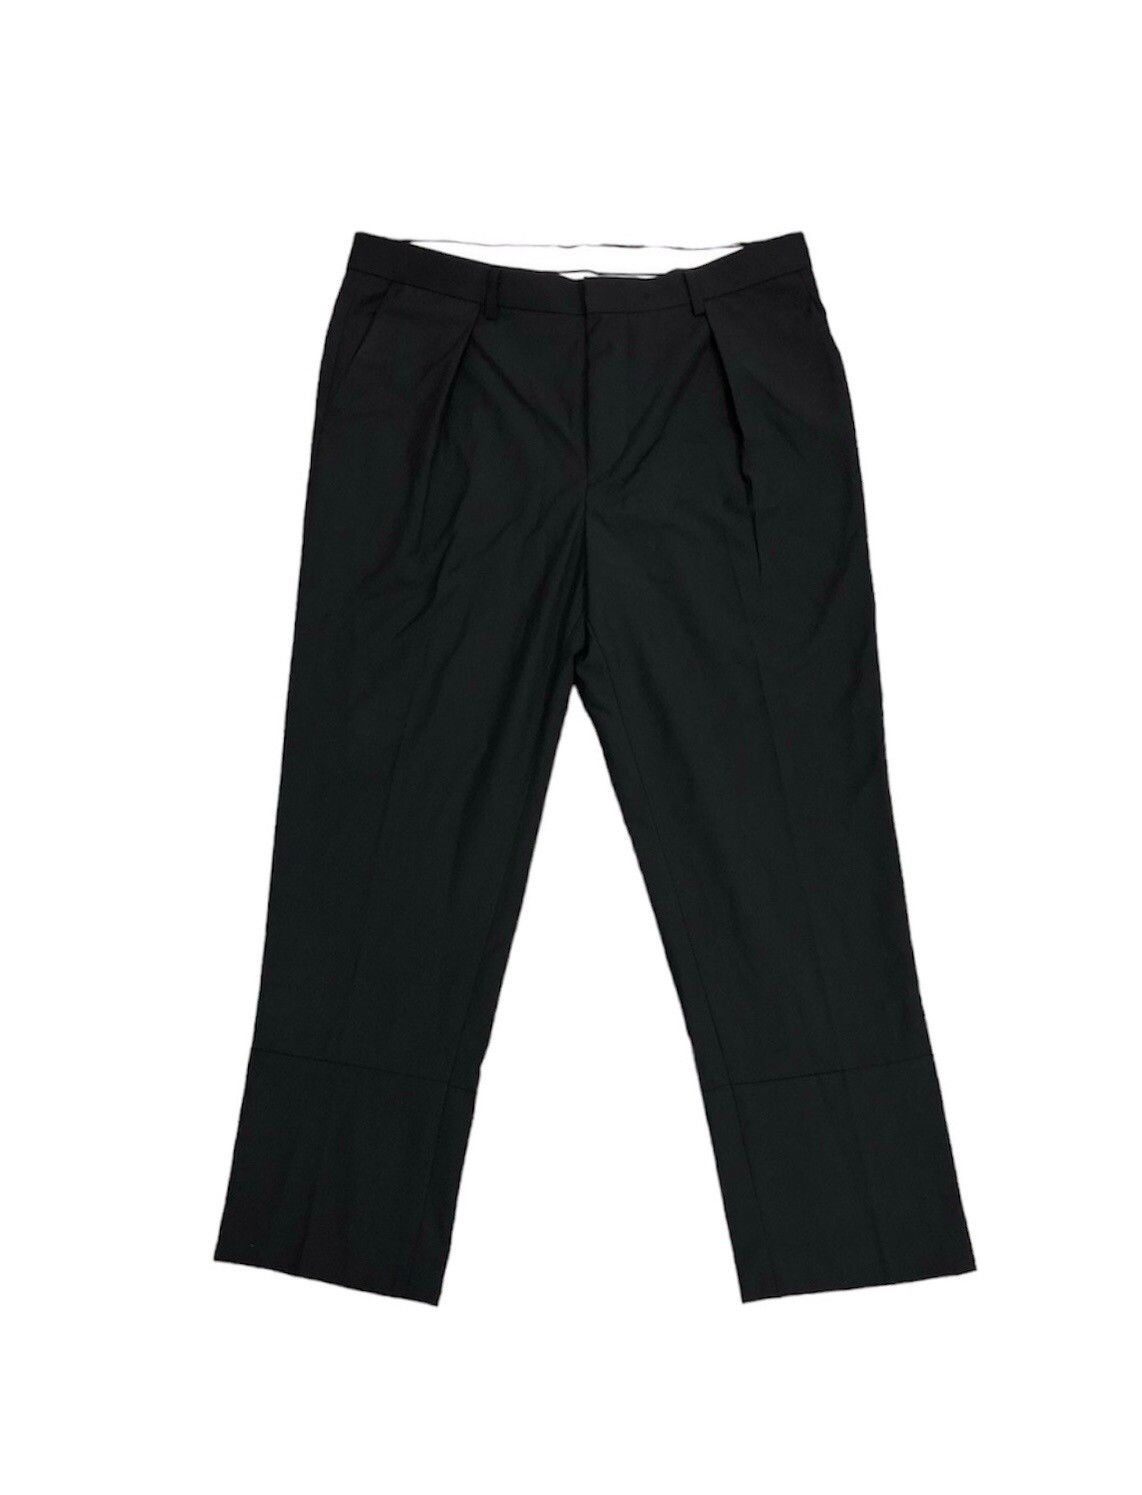 SS14 Acne Studios Casual Office Pant - 1